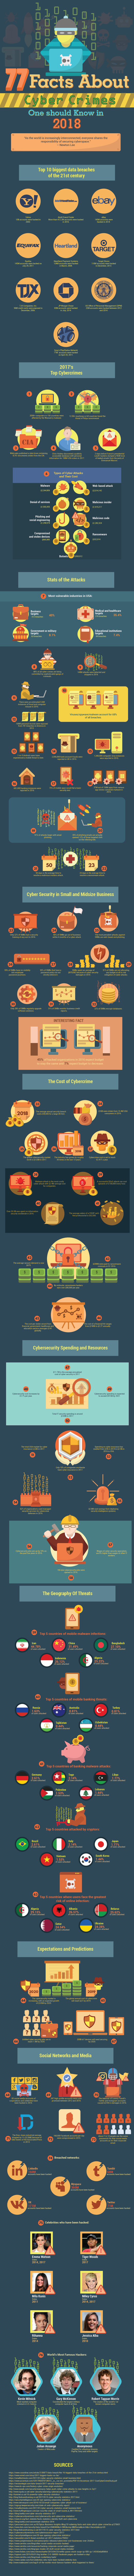 77 facts about cyber crimes